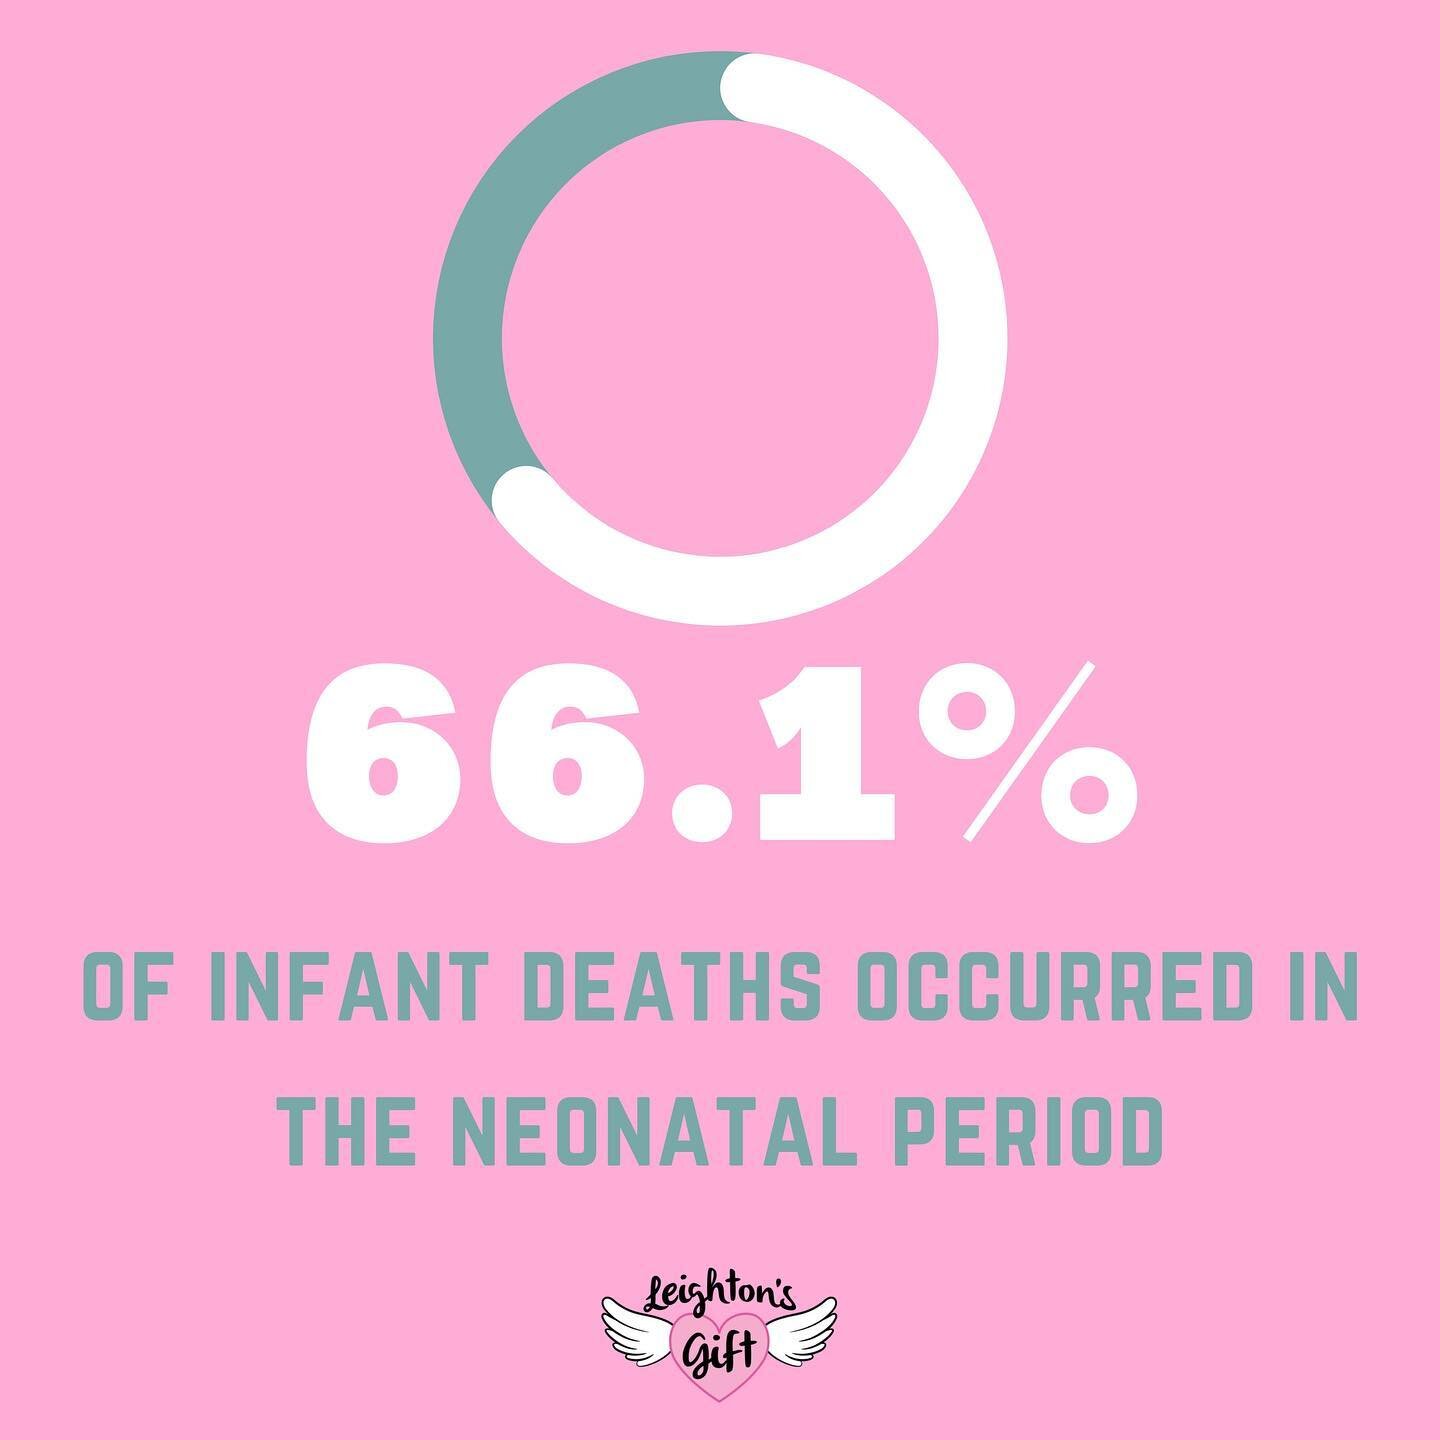 66.1% of infant deaths occurred in the neonatal period. The neonatal period is defined as the first 30 days of life.